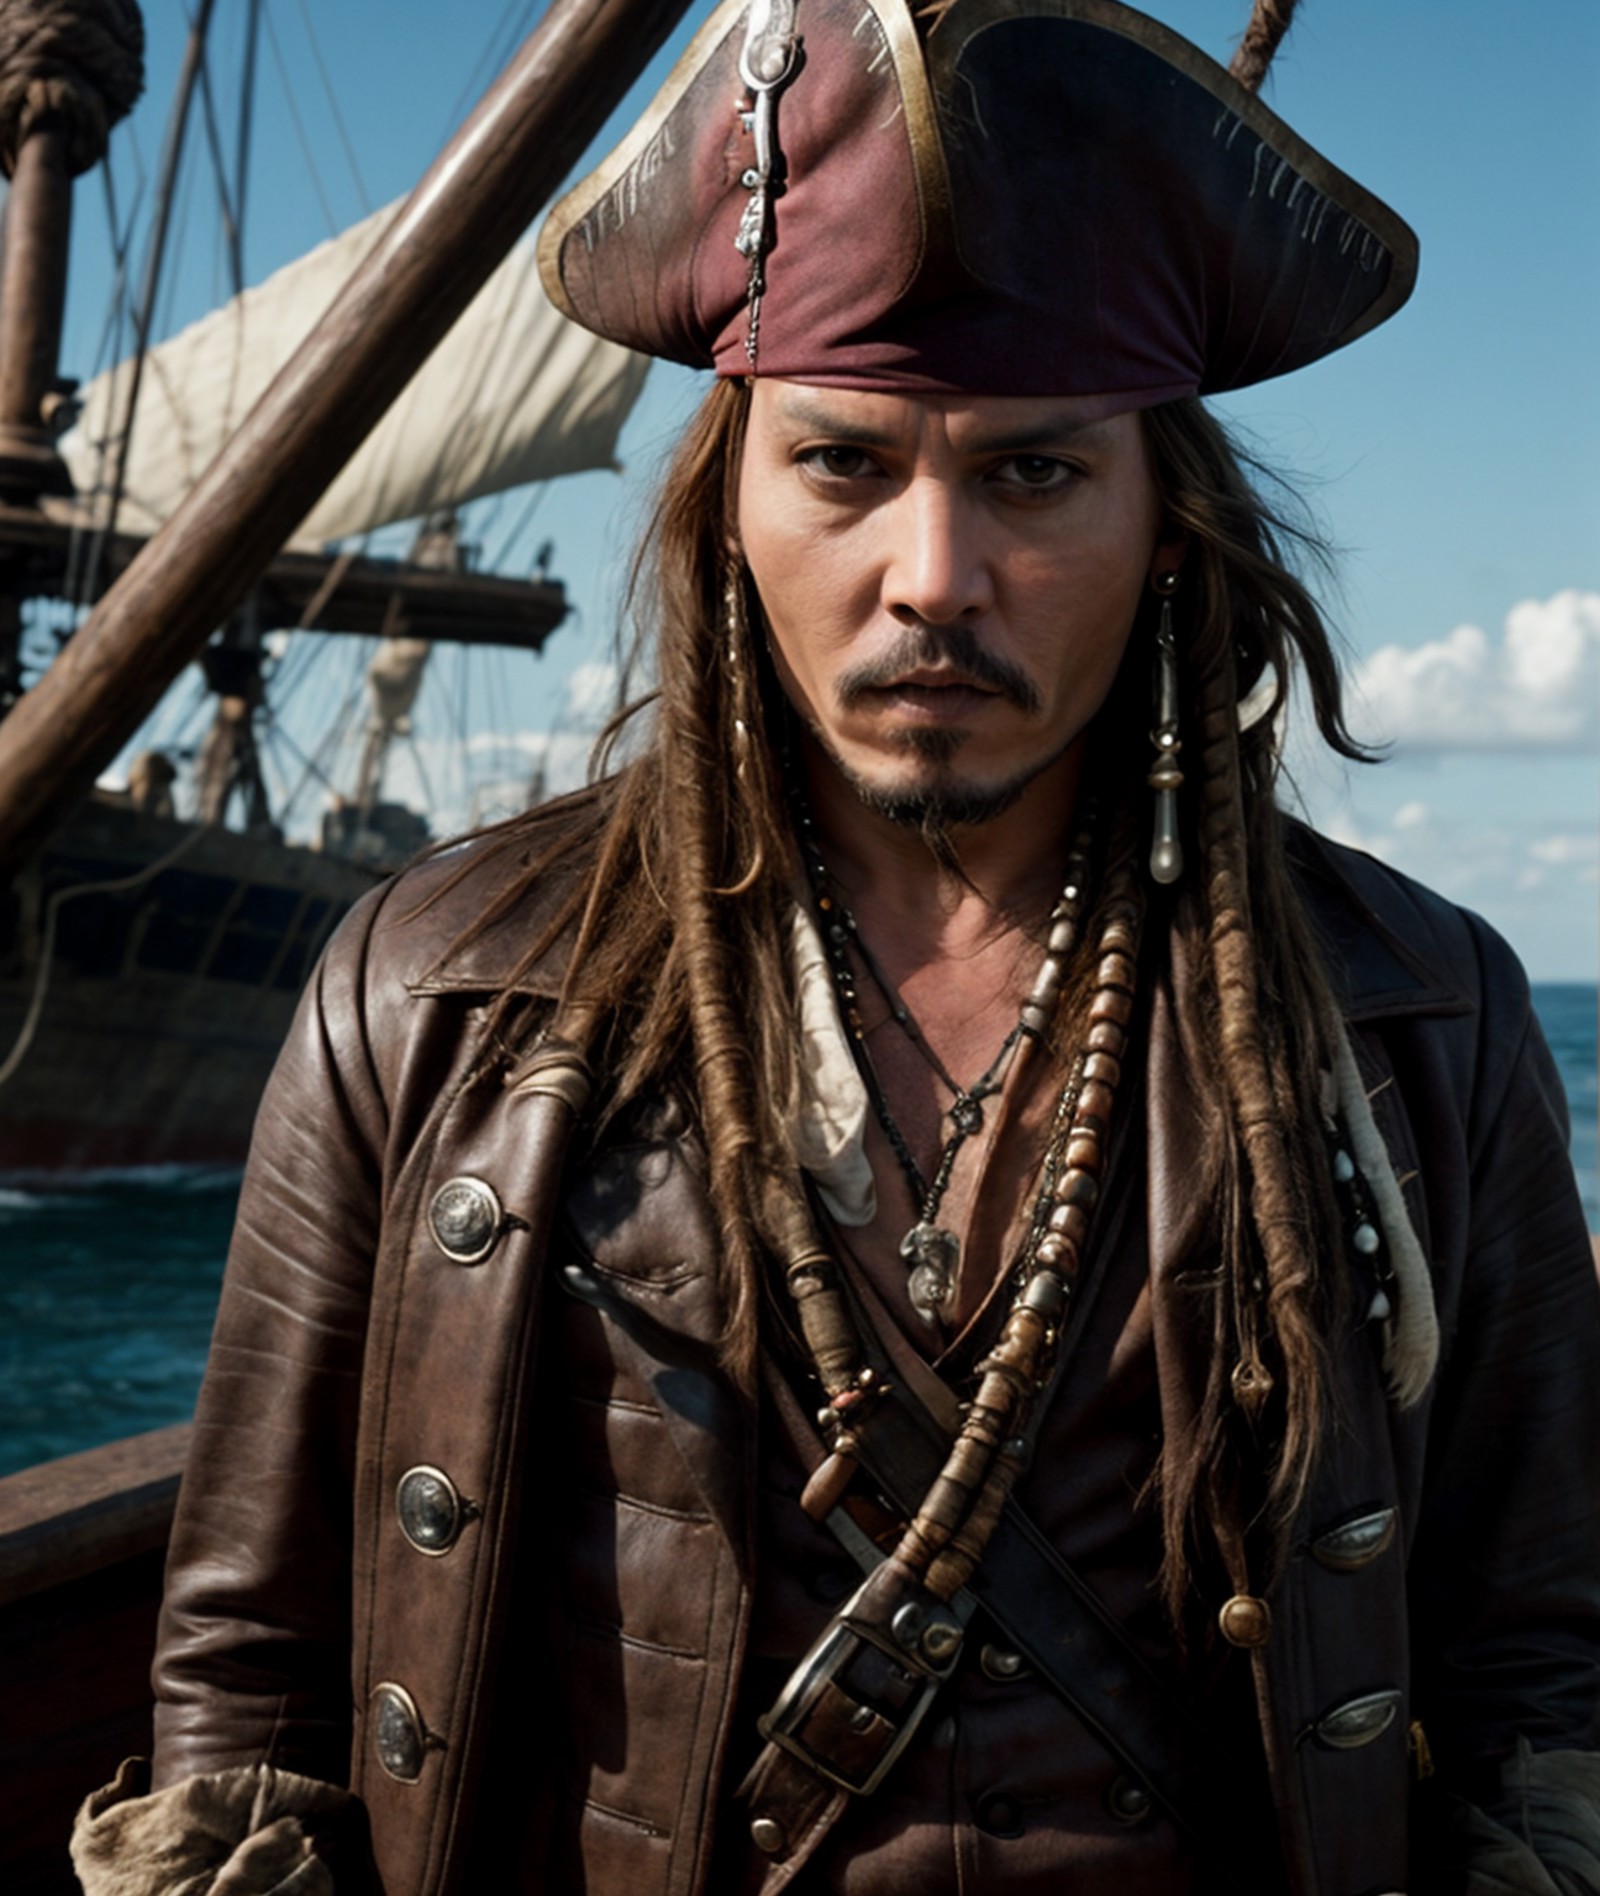 cinematic photo photo, (Minion) impersonating Captain Jack Sparrow from (Pirates of the Caribbean) played by Johnny Depp i...